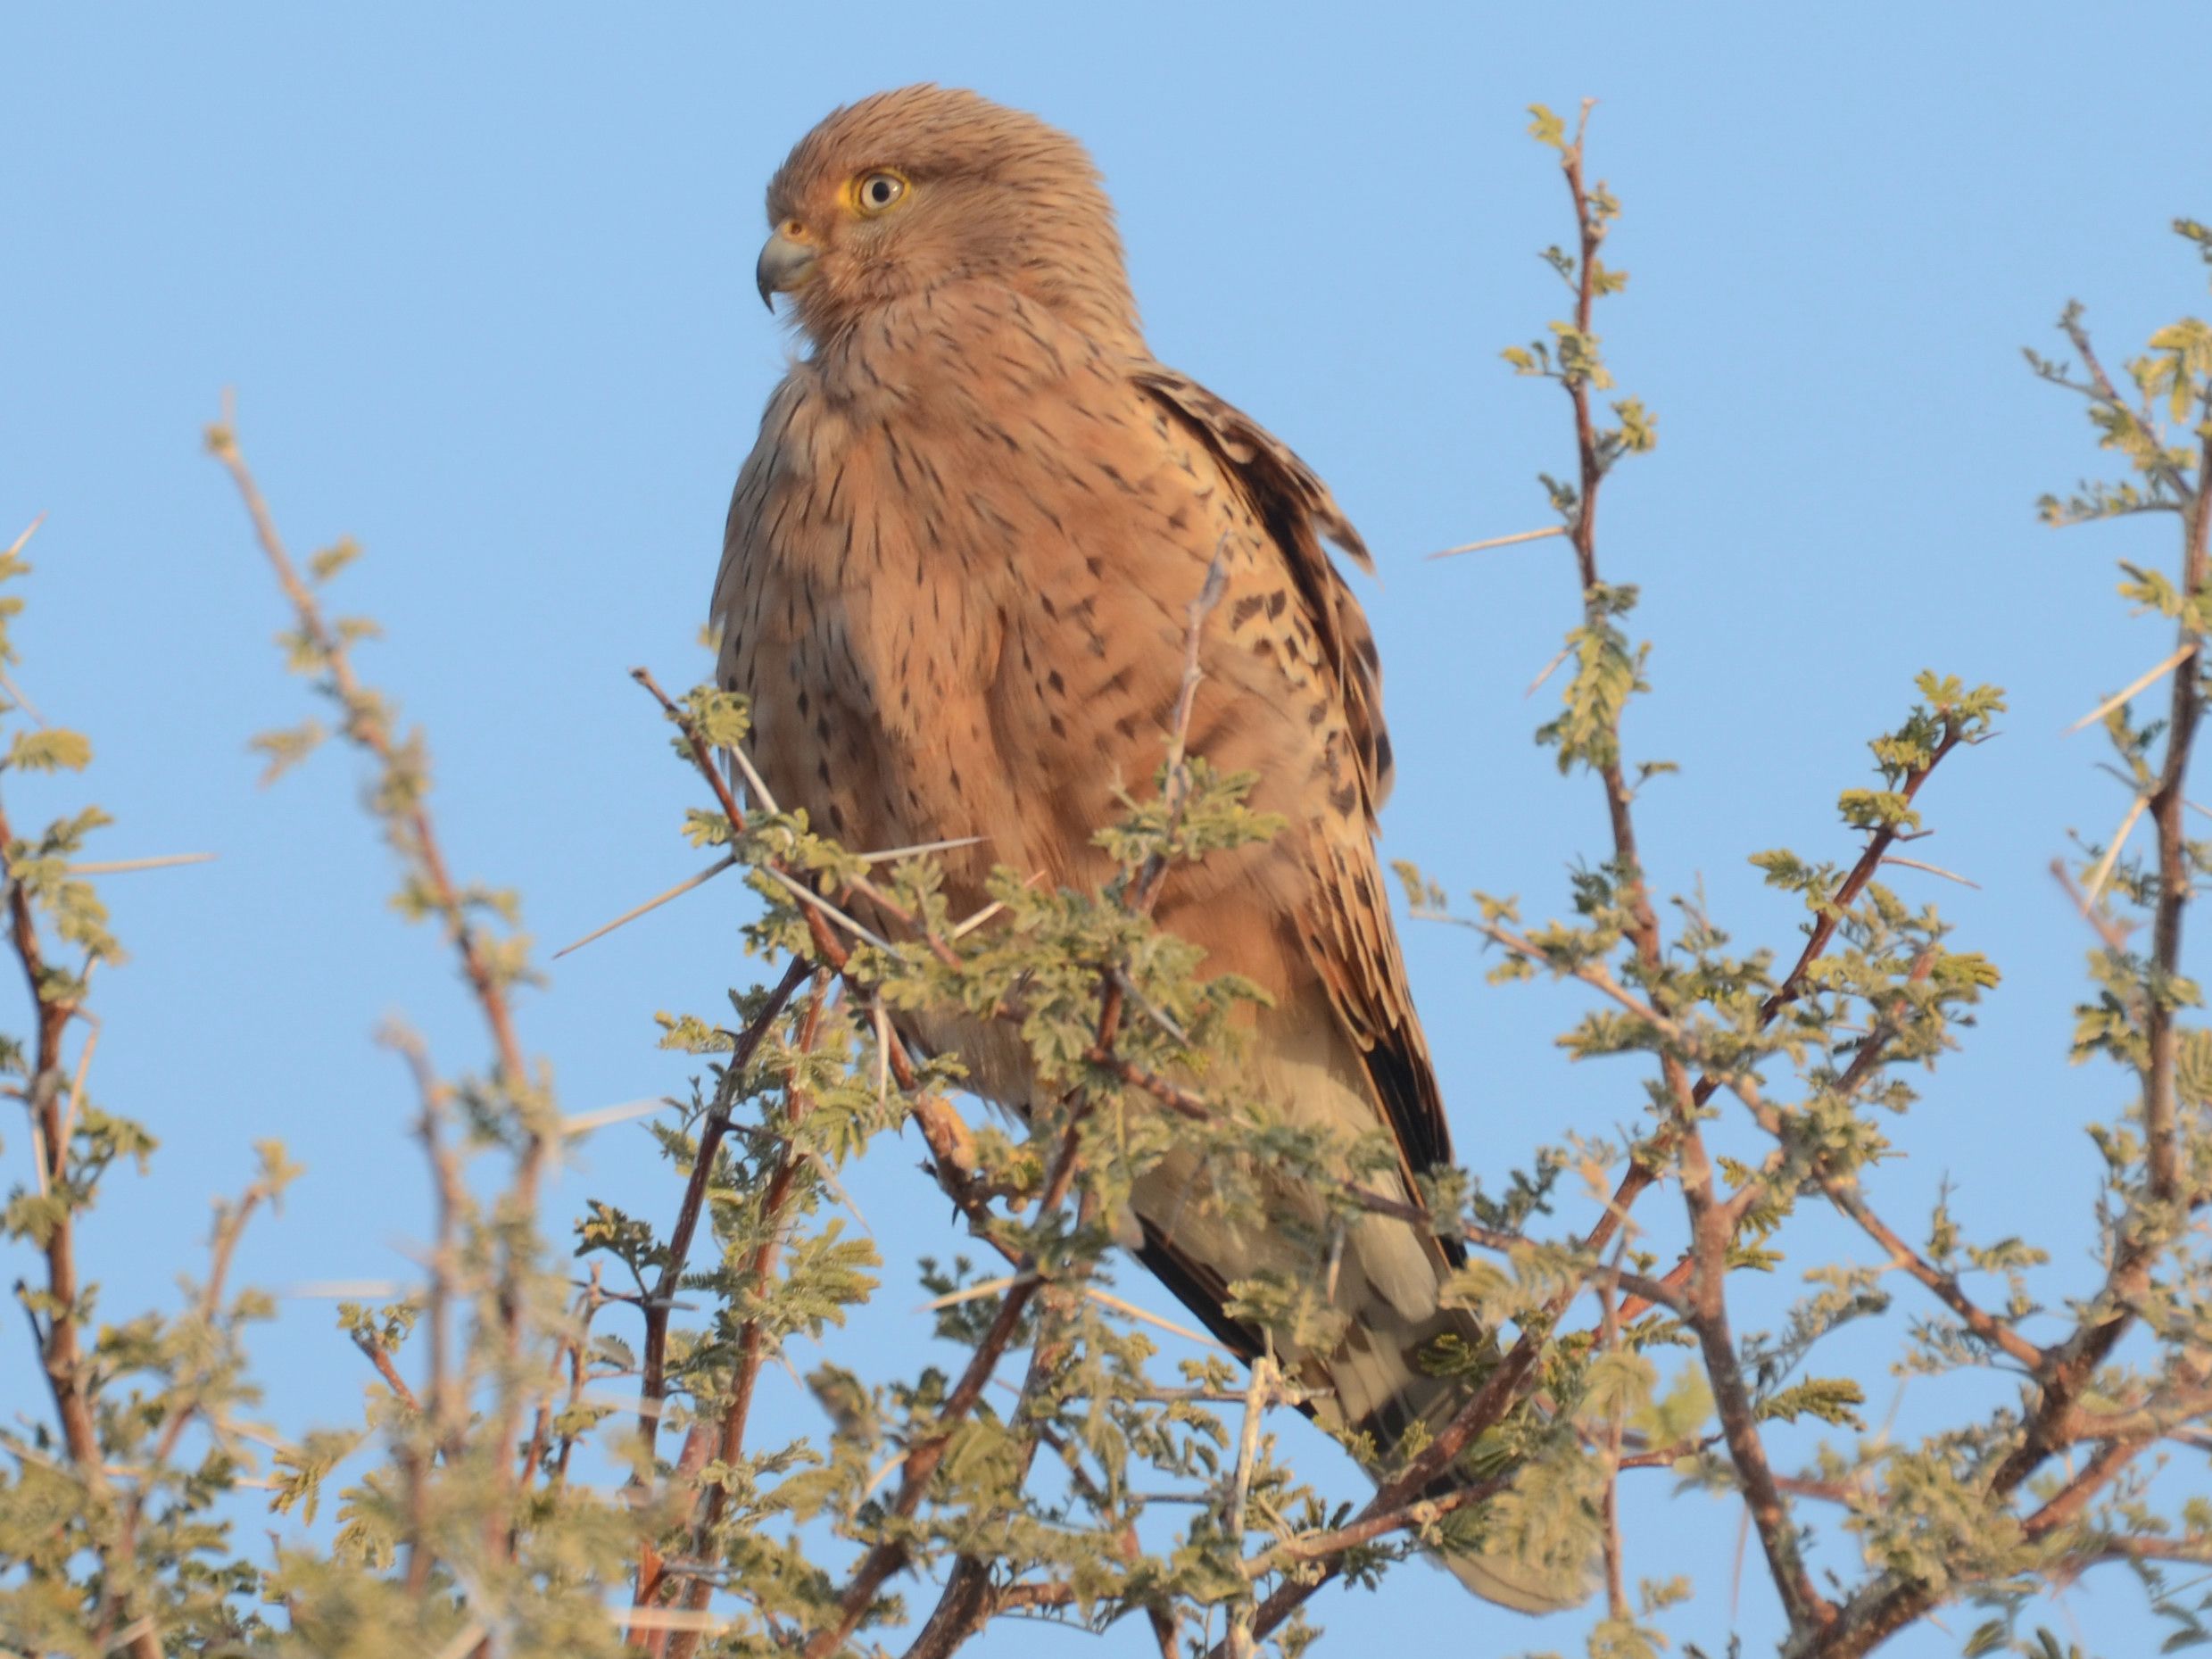 Click picture to see more Greater Kestrels.